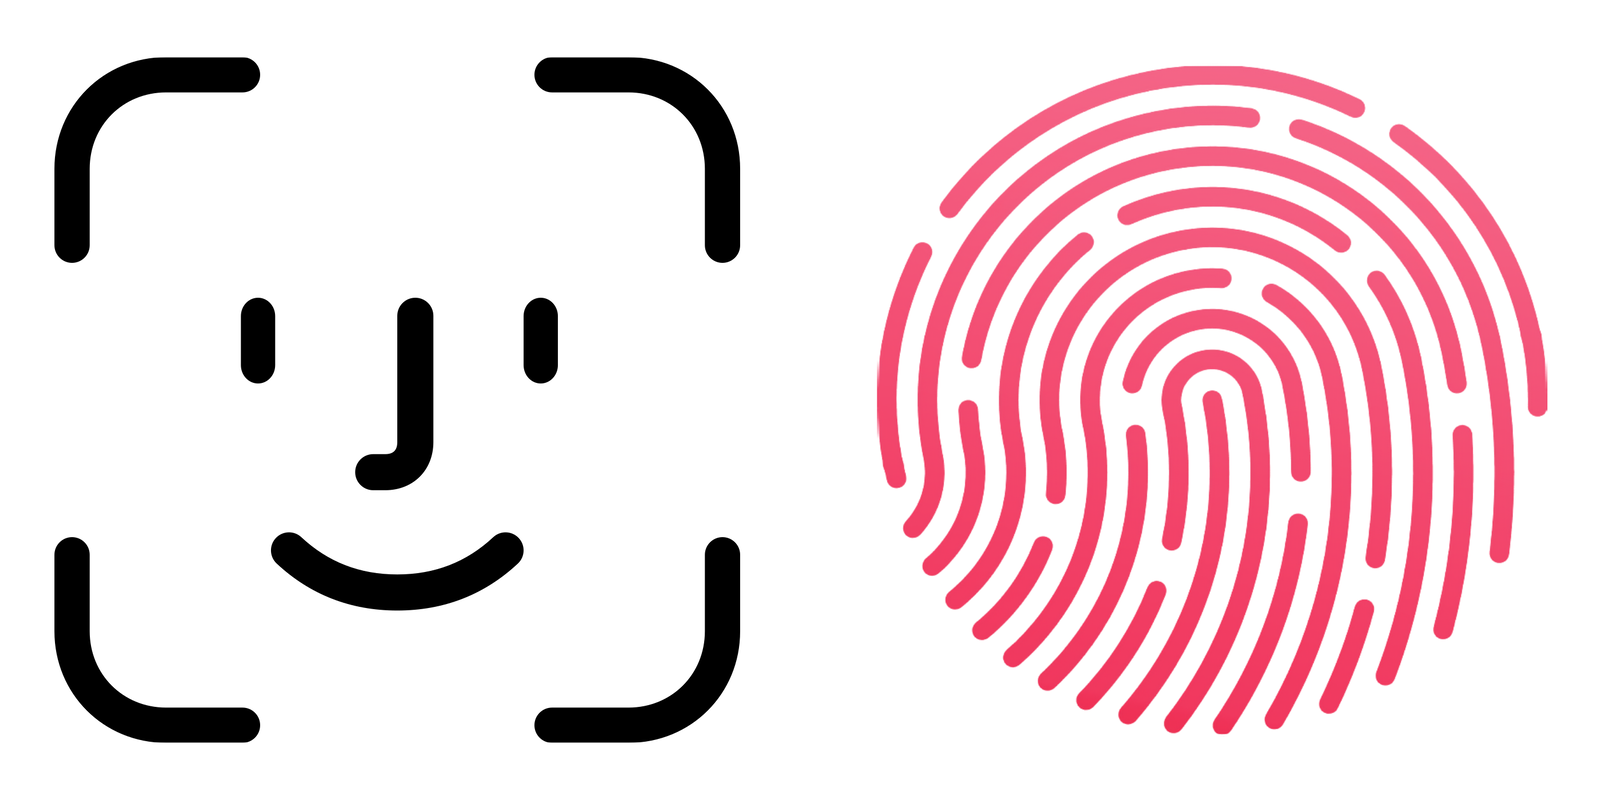 Is Face ID more accurate than Touch ID?